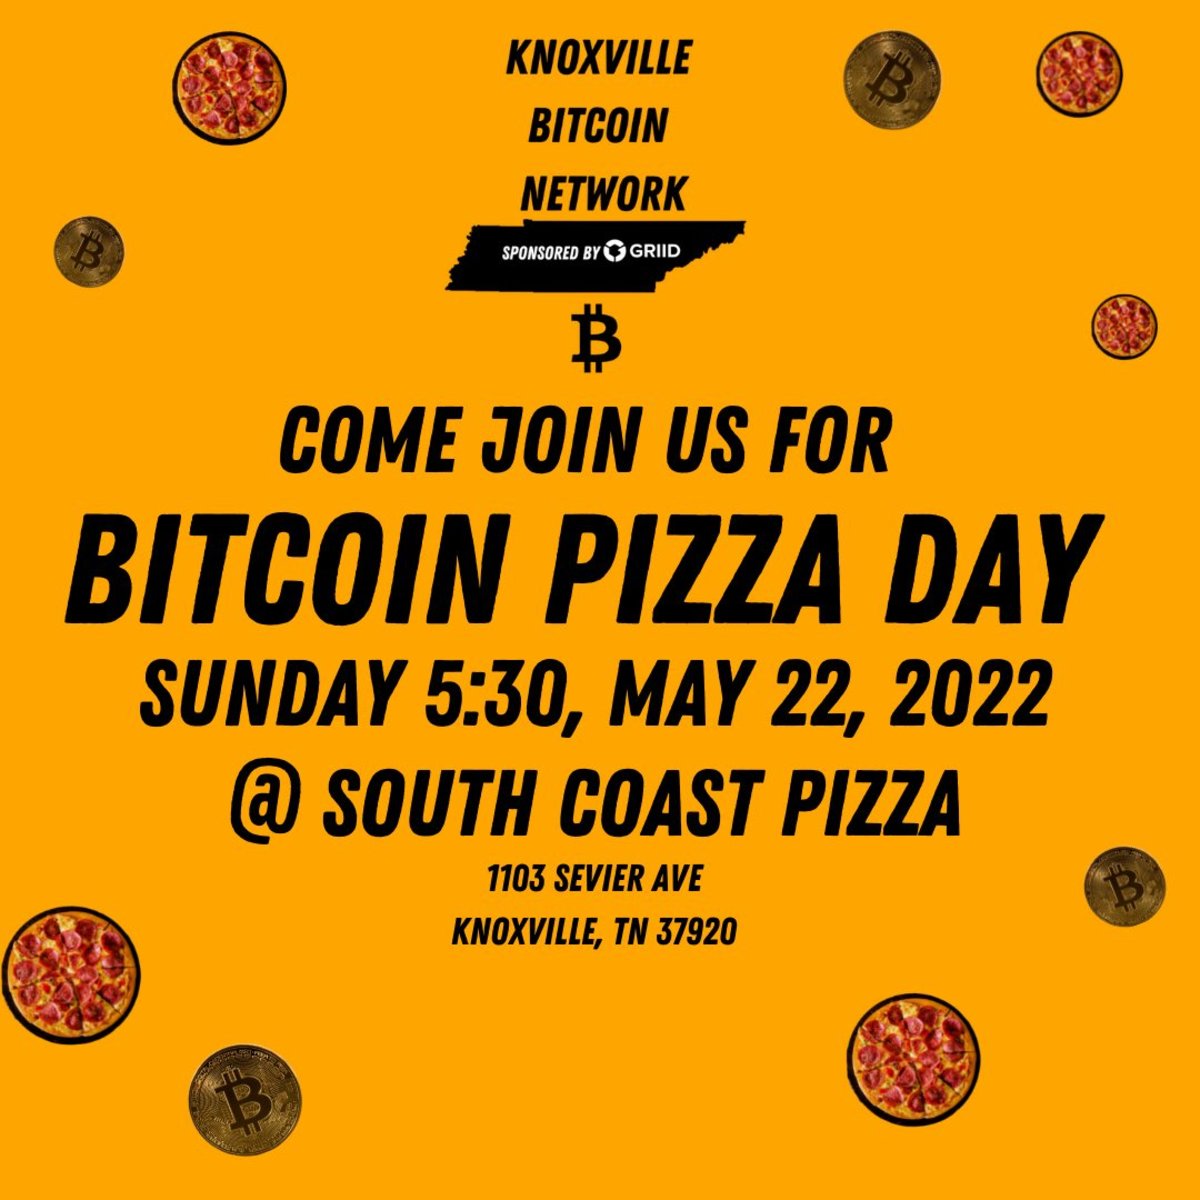 One meetup group will gather to purchase pizzas using bitcoin and celebrate the day that Bitcoin achieved its first real-world moment of adoption.